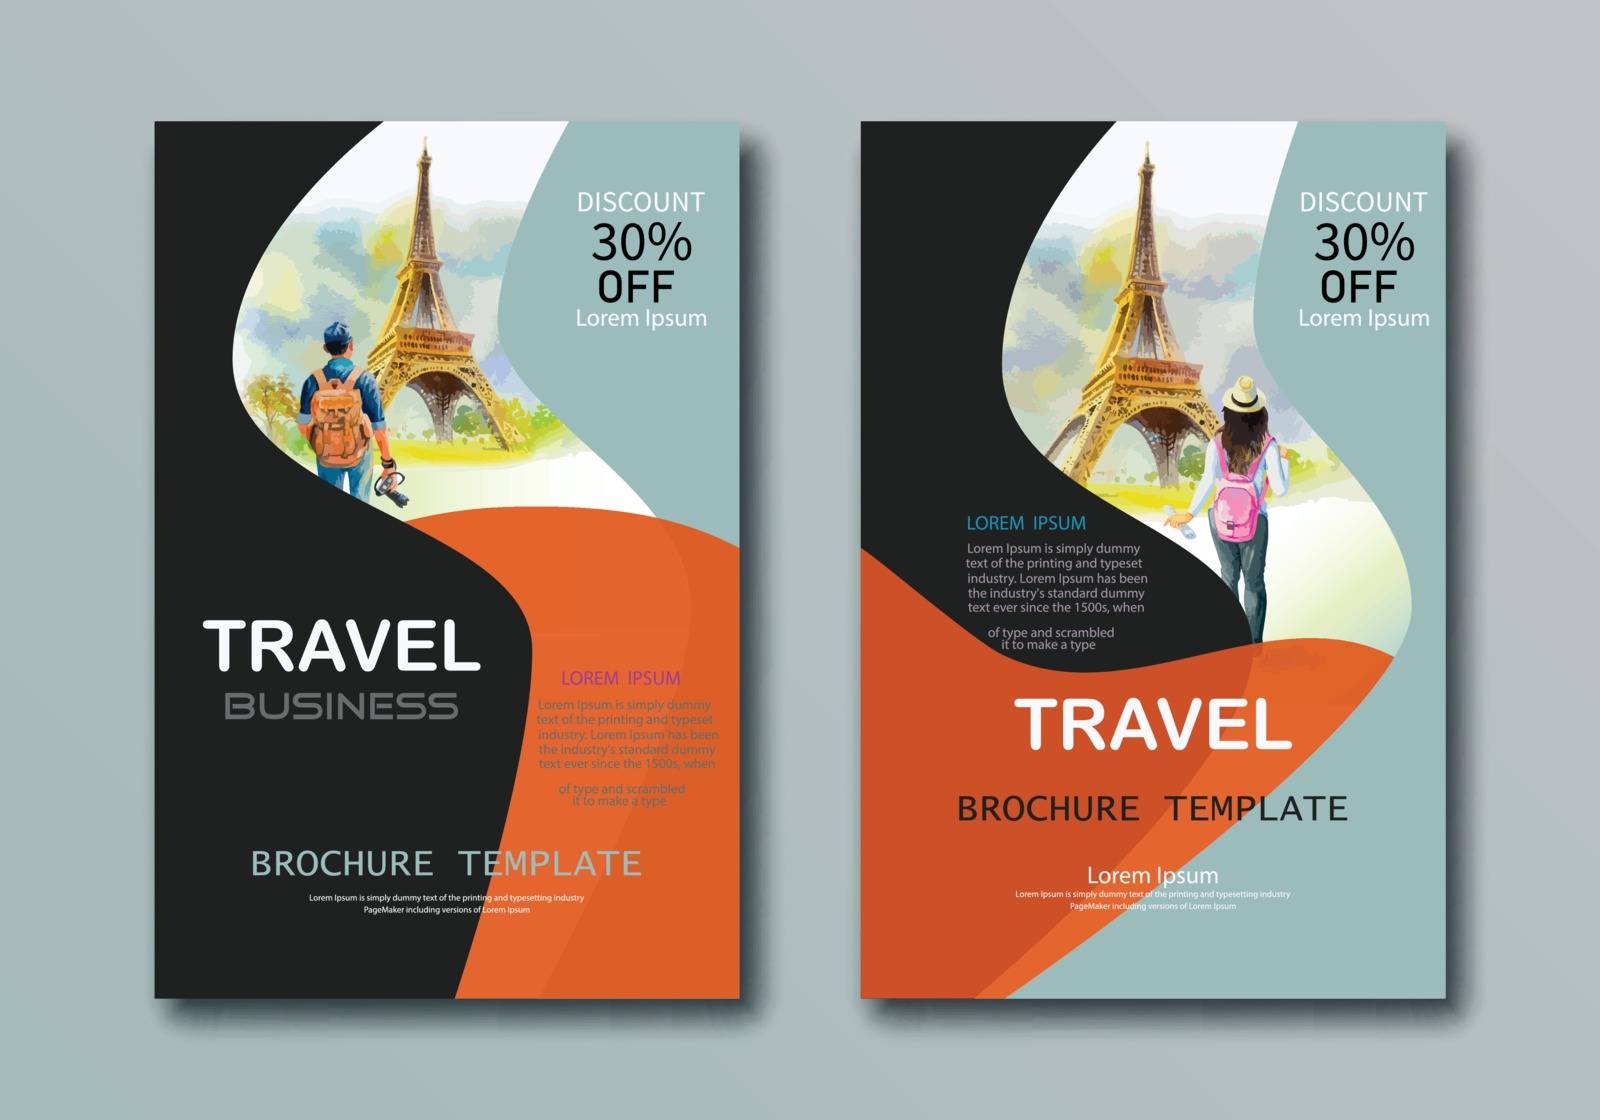 Sample presentation brochure cover design layout space for trave by Painterstok